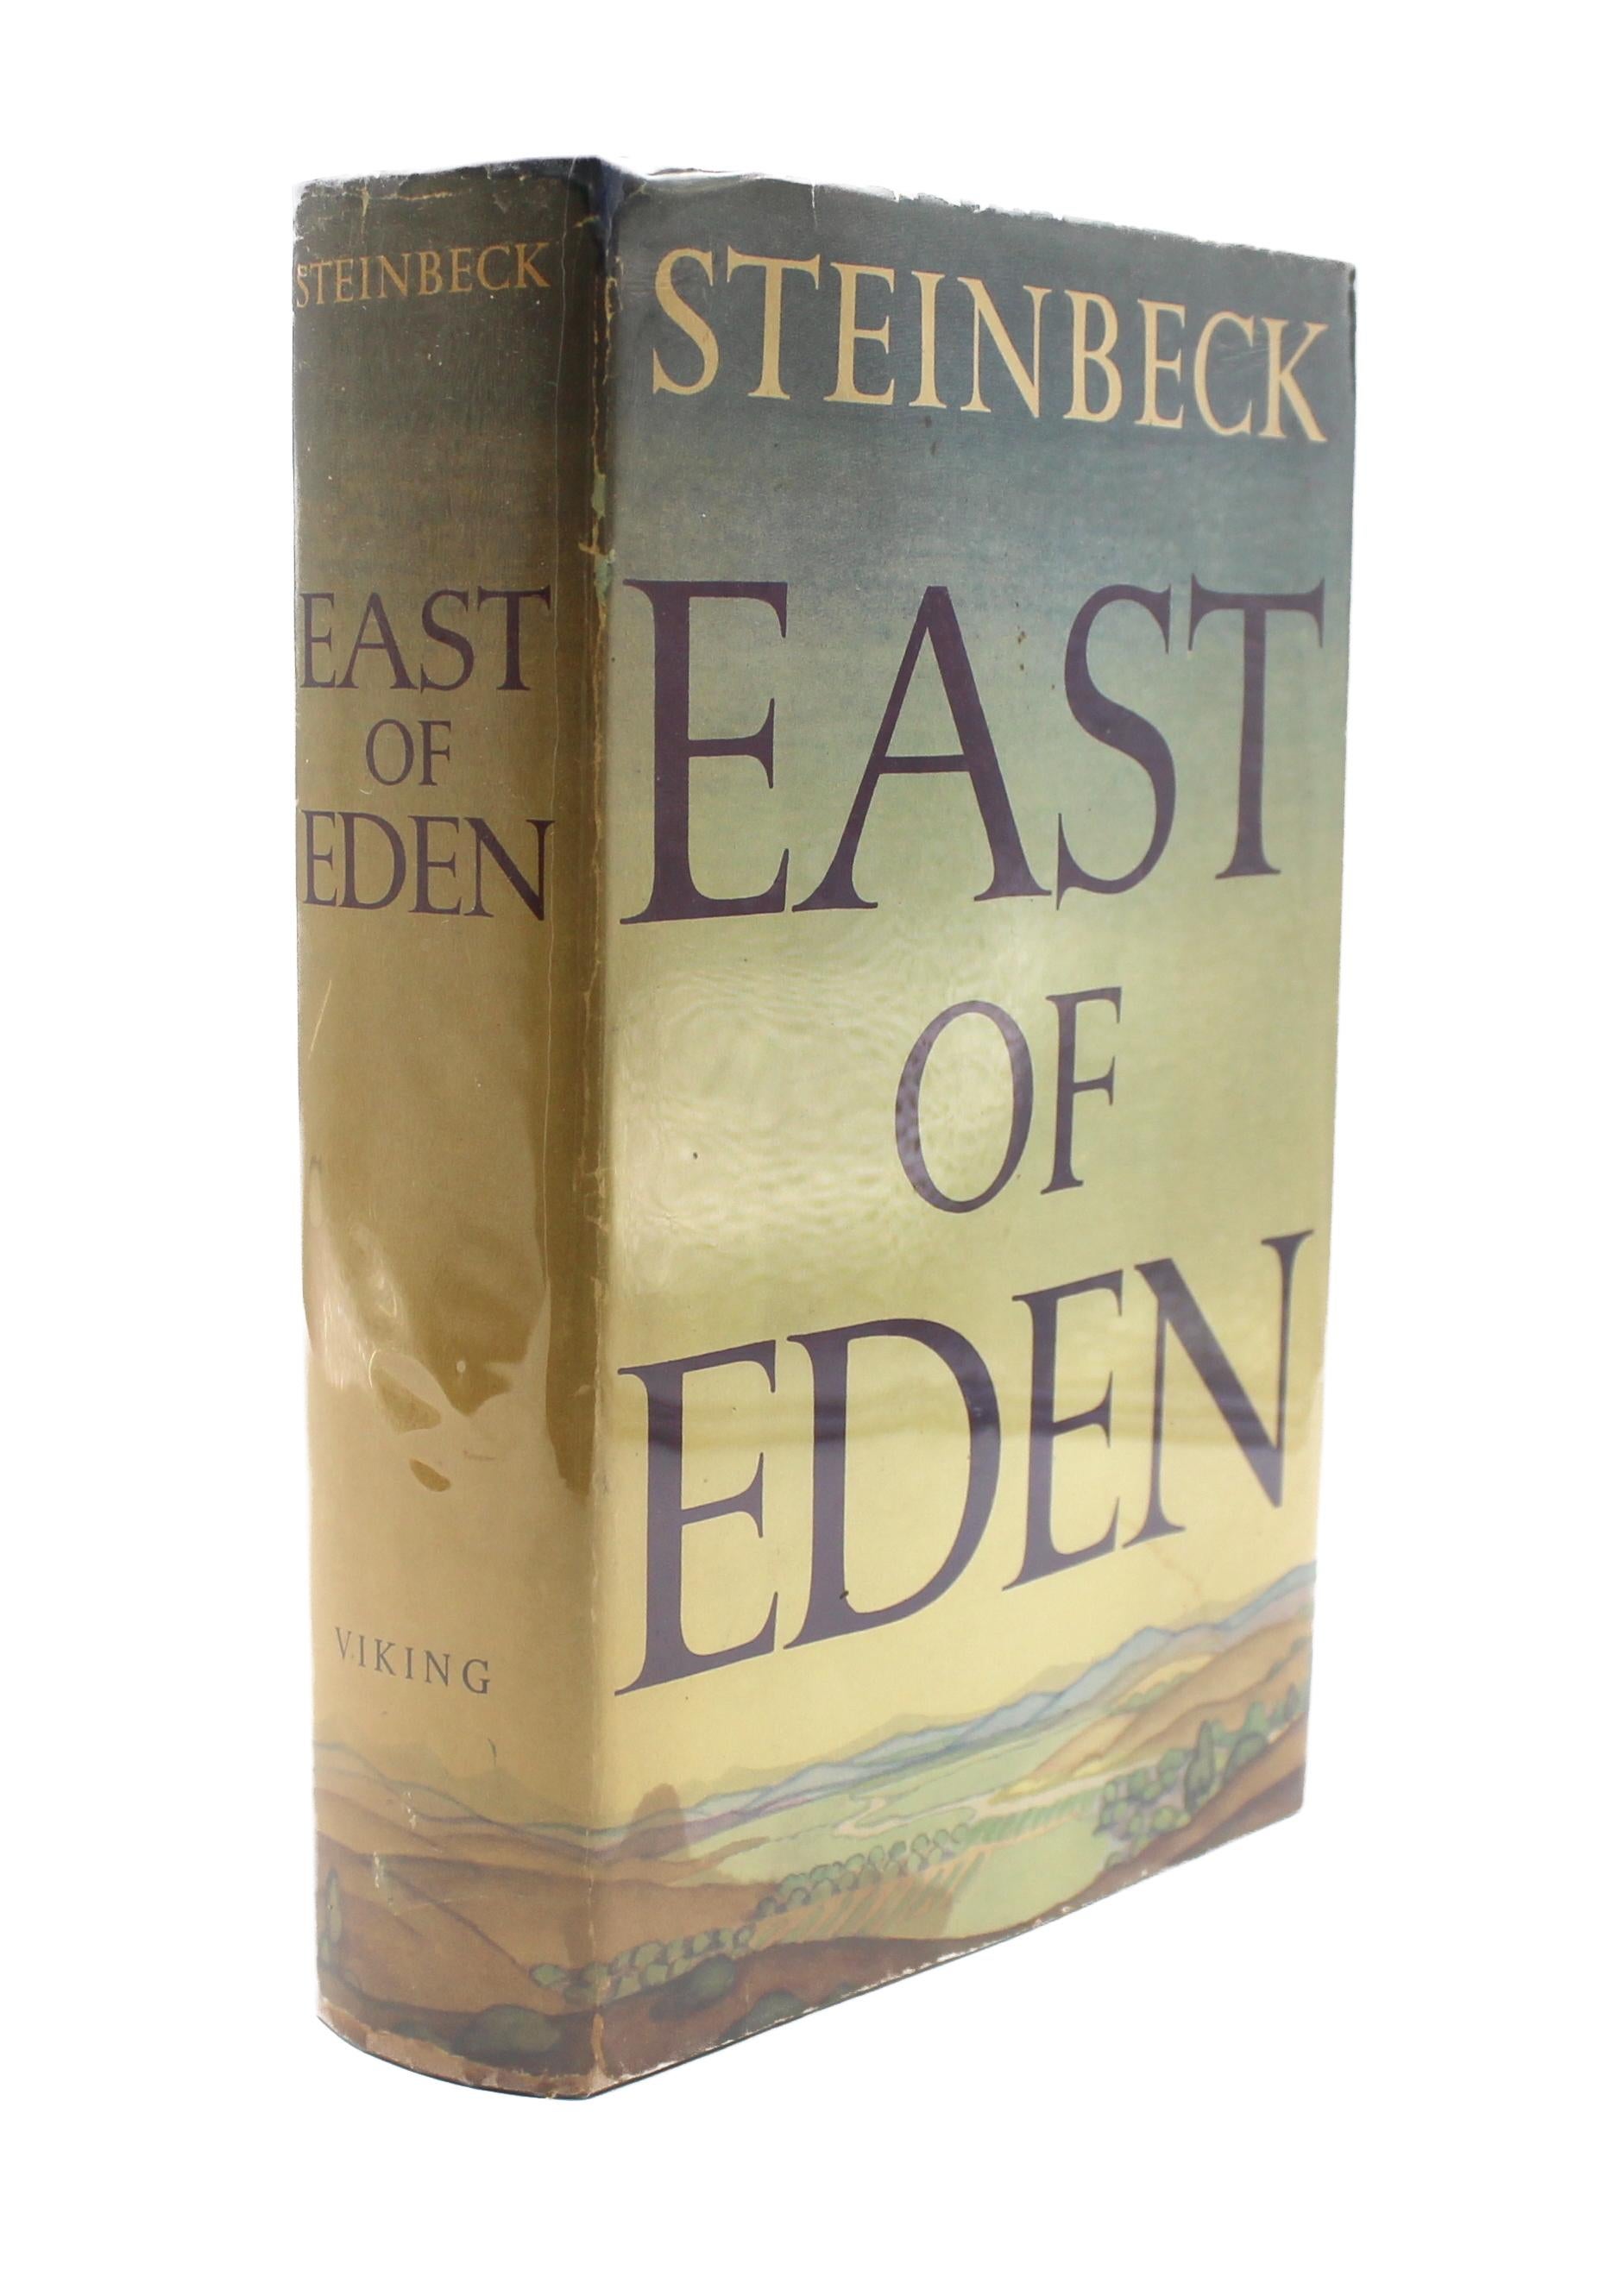 east of eden book covers